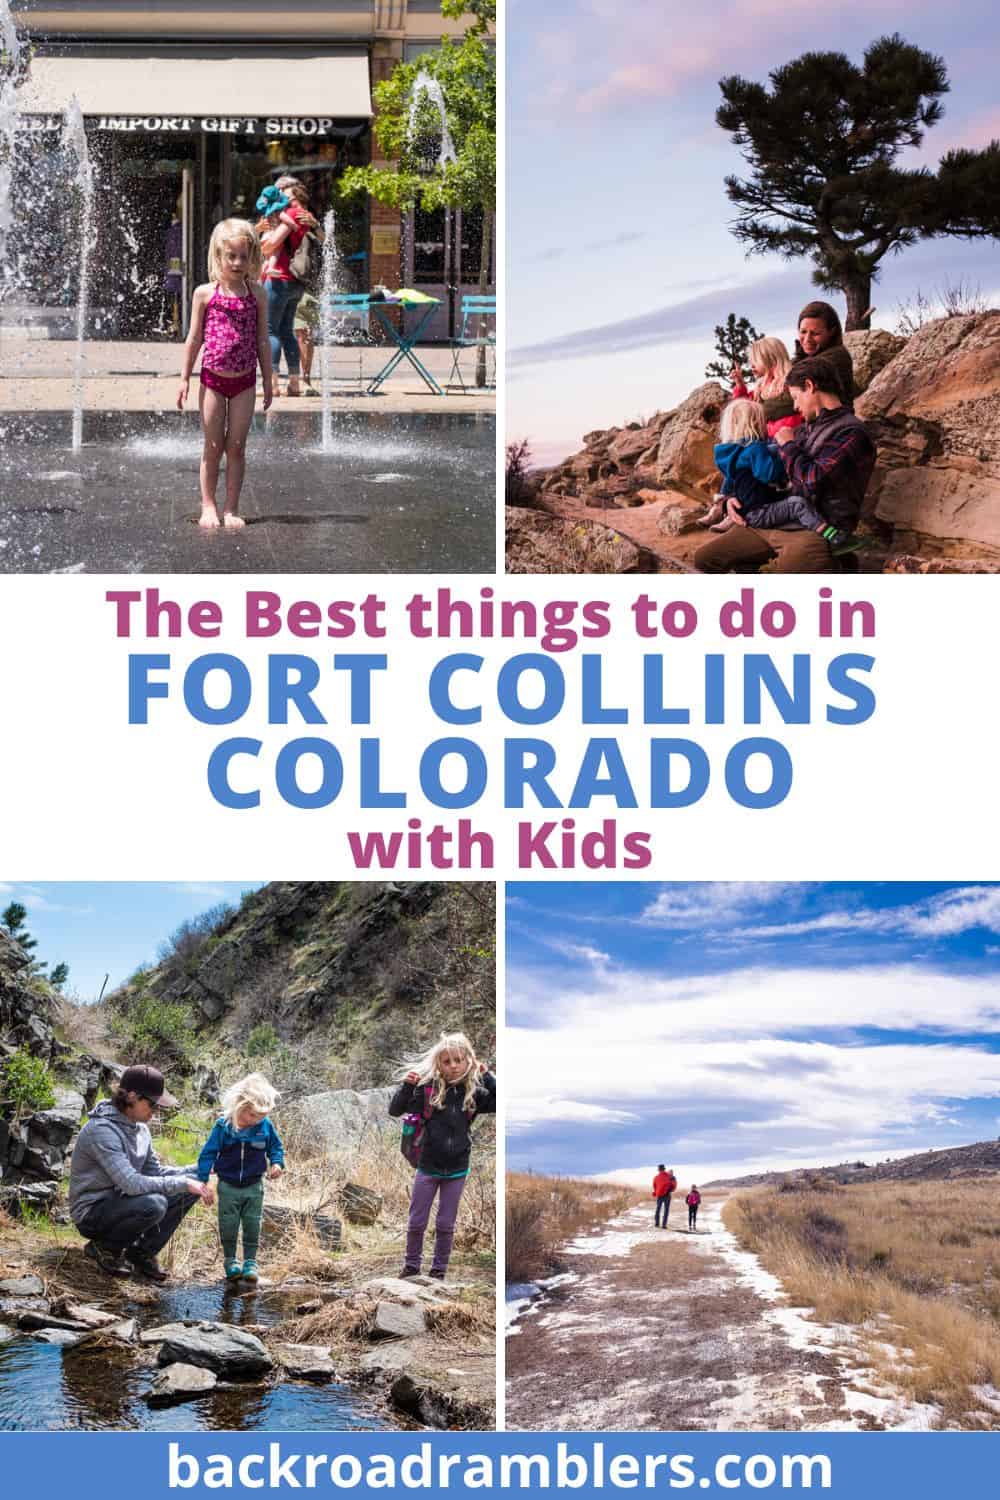 A collage of photos featuring kids in Fort Collins, Colorado.